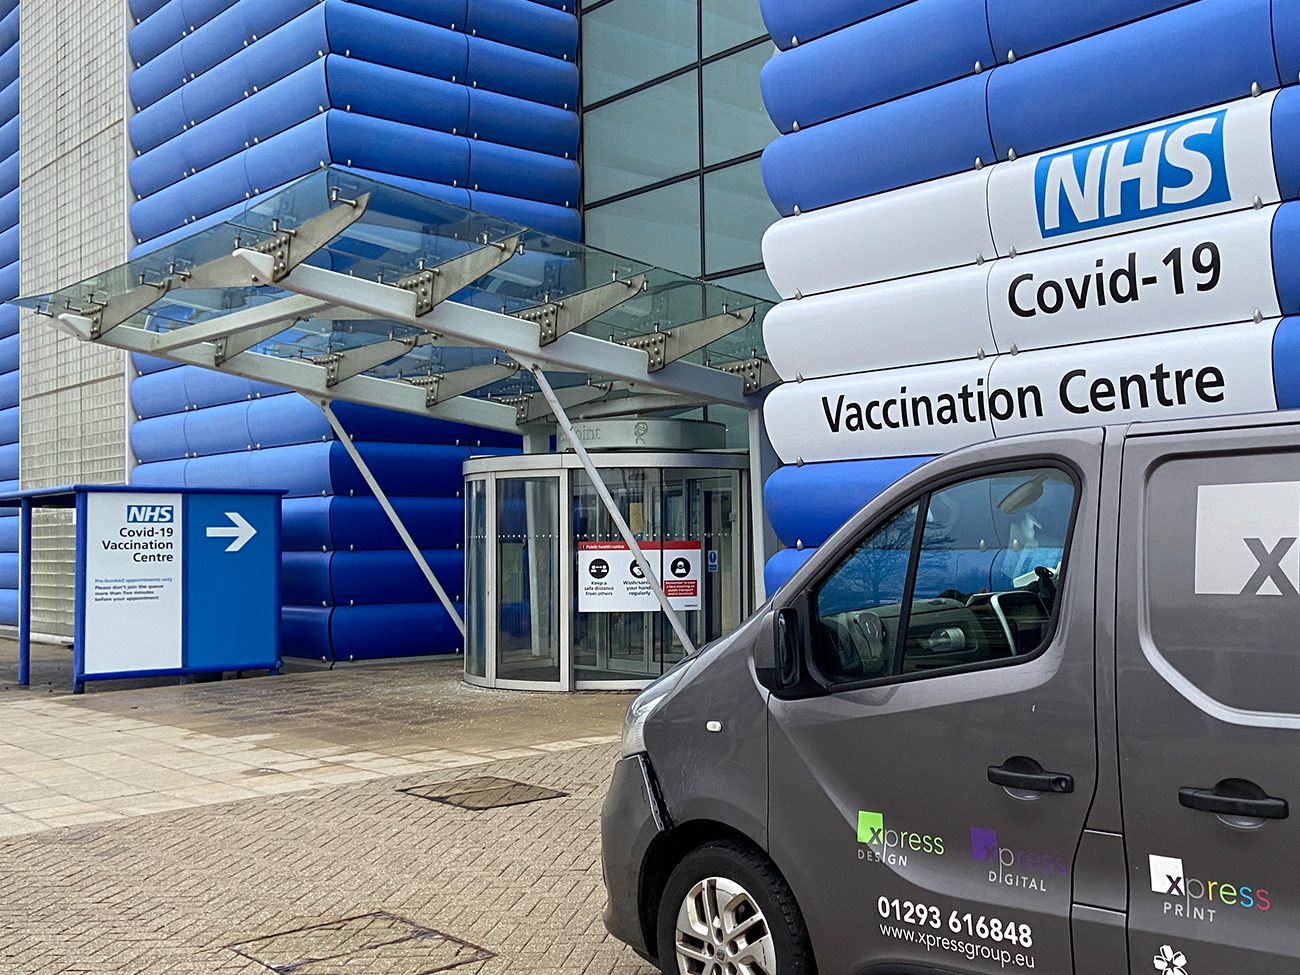 NHS Vaccination Centre Heathrow signage by Xpres